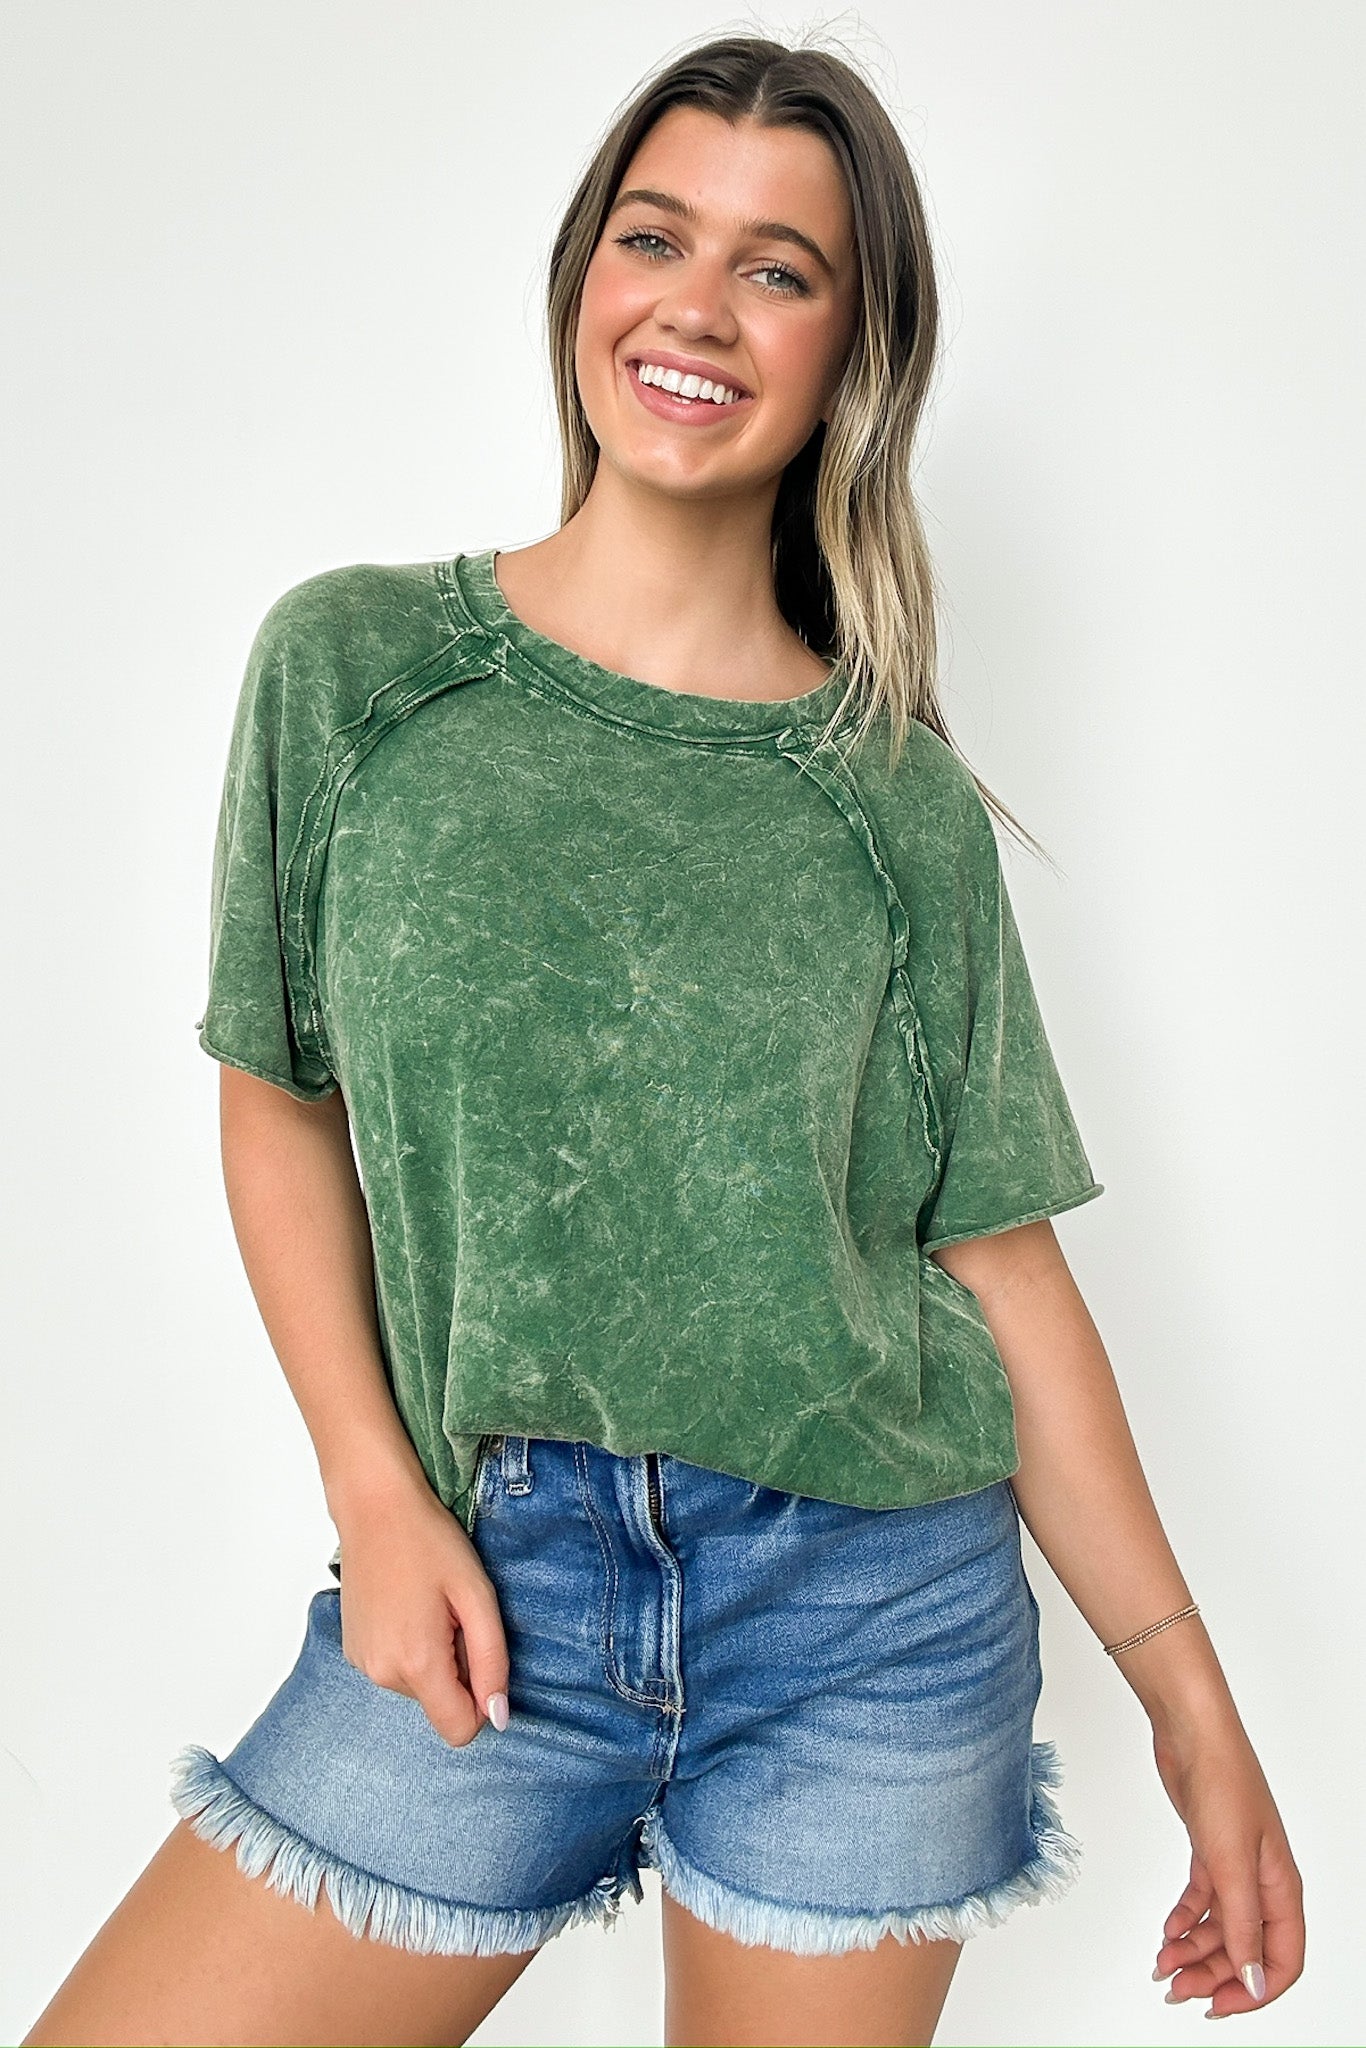 Carowyn Mineral Wash Relaxed Fit Top - BACK IN STOCK